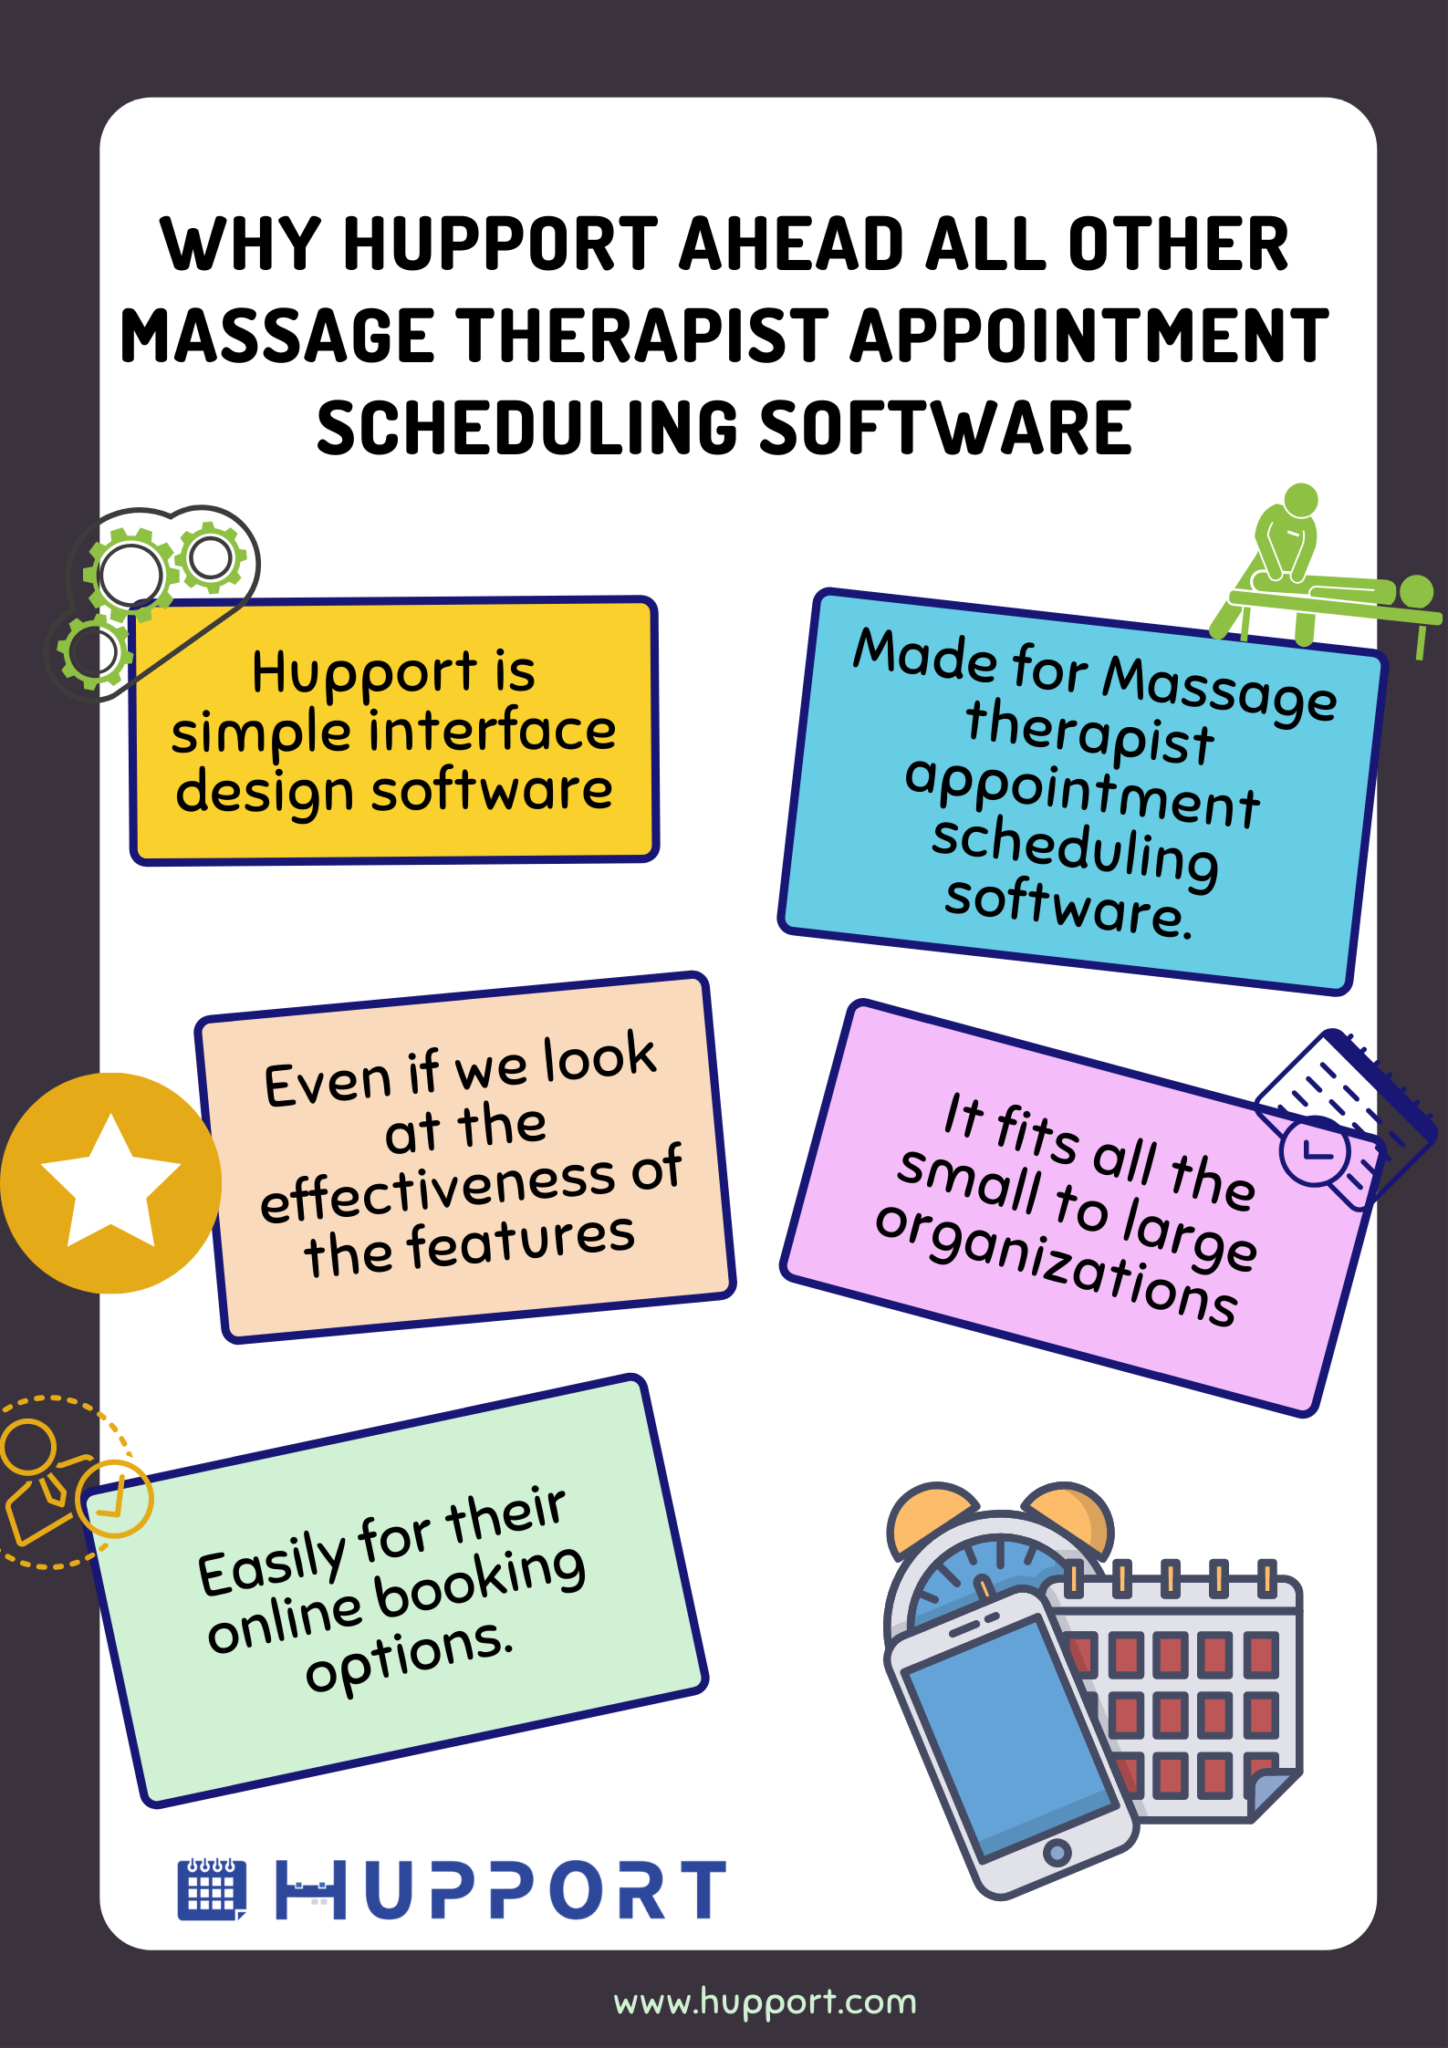 Top 7 Massage Therapist Appointment Scheduling Software Indepth Reviews Free Online